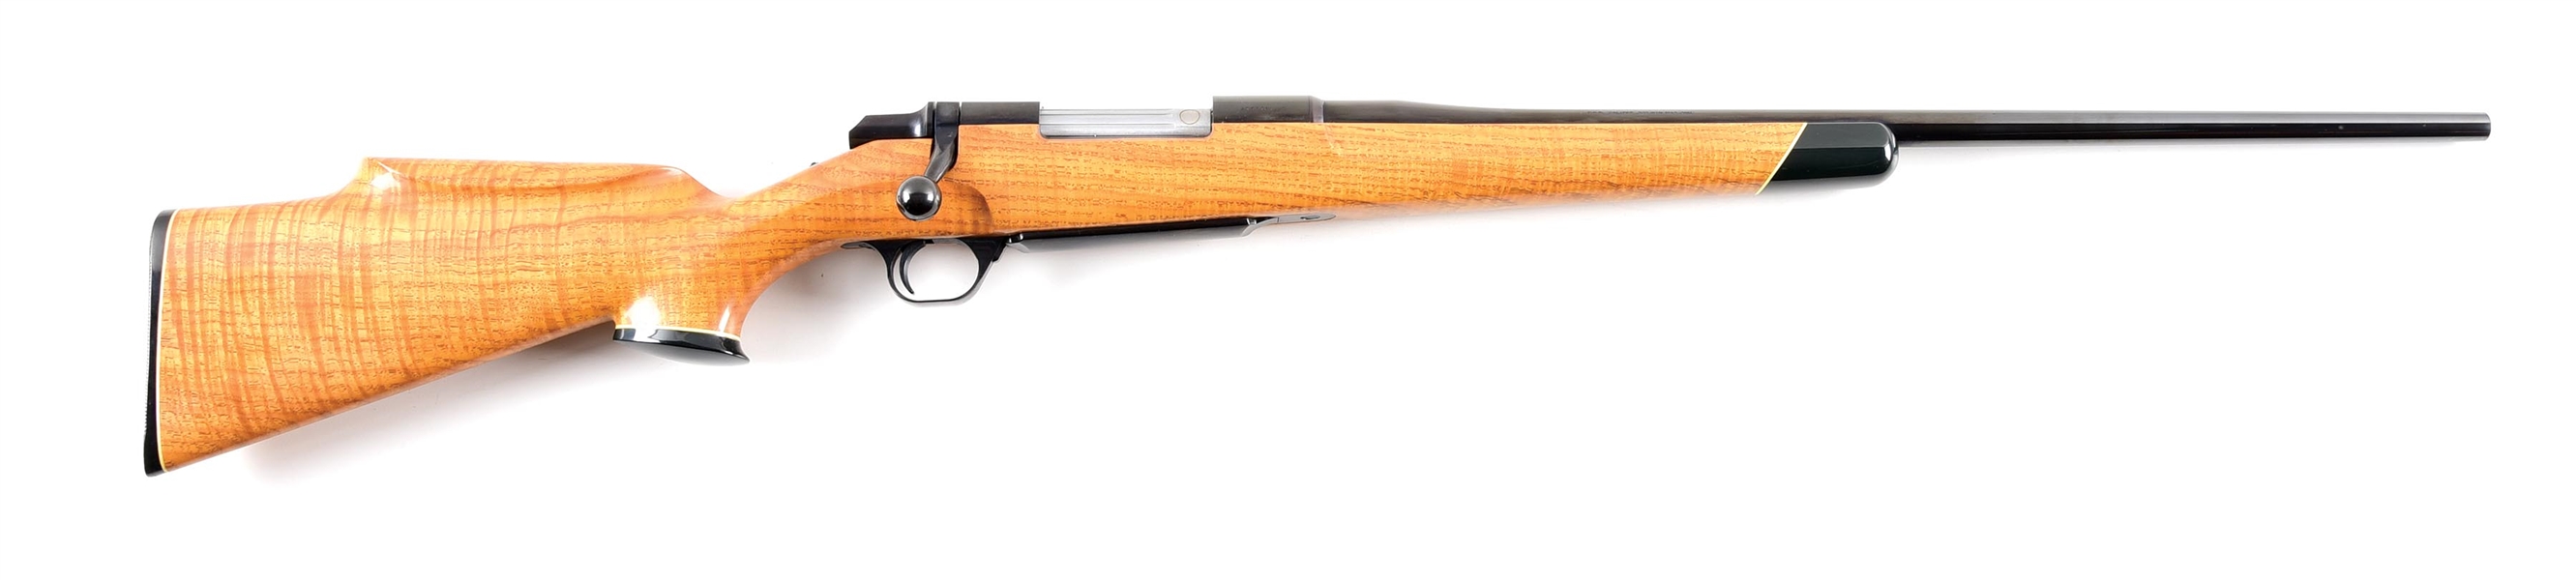 (M) BROWNING BBR BOLT ACTION RIFLE WITH PECAN STOCK.